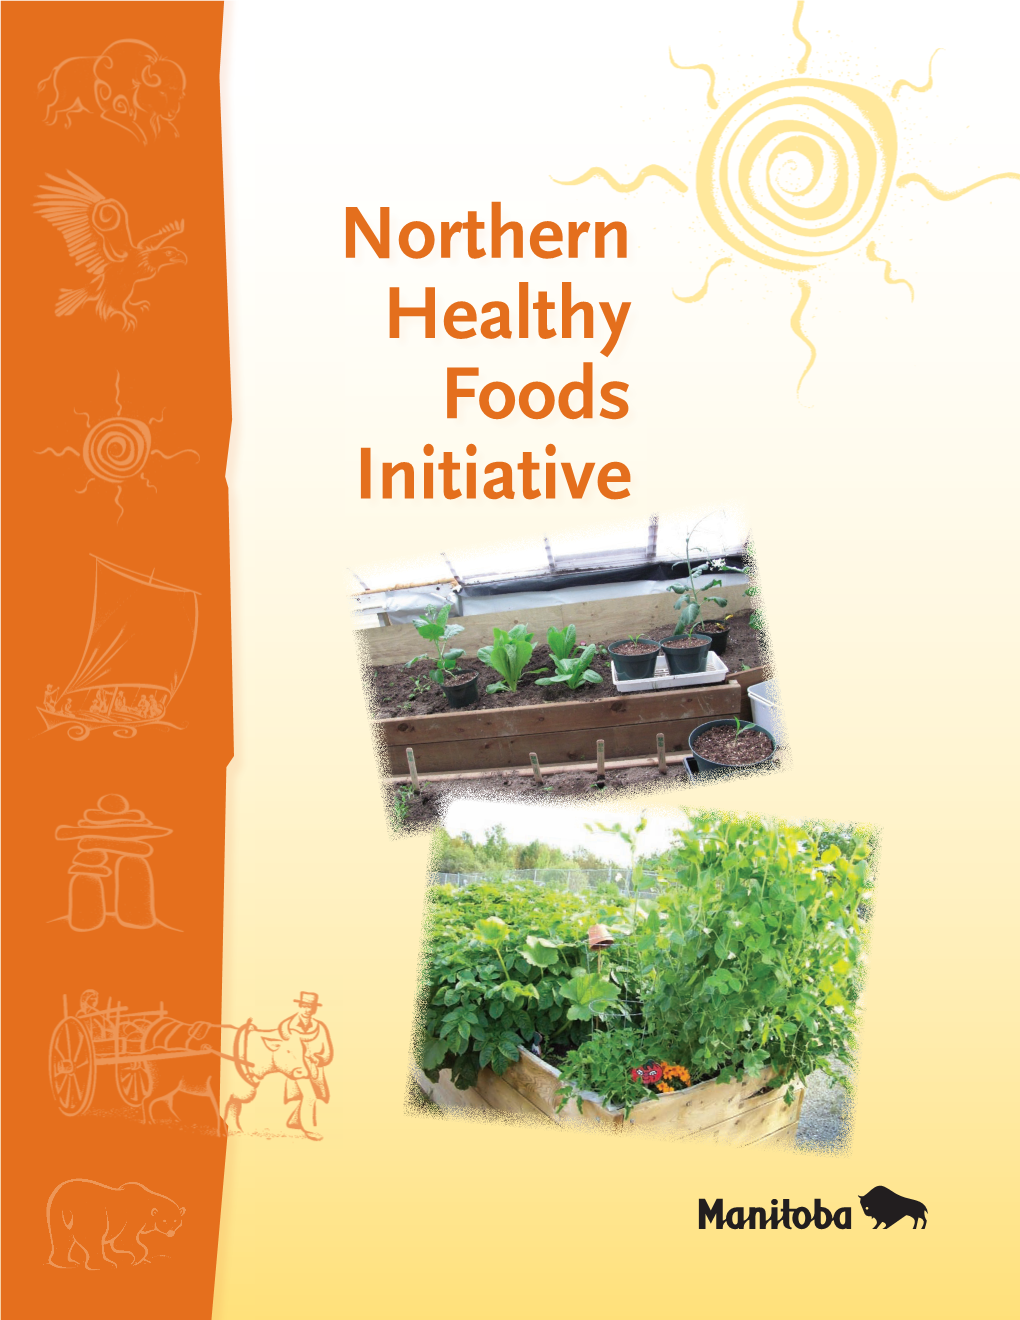 Northern Healthy Foods Initiative Introduction This Report Describes the Northern Healthy Foods Initiative (NHFI) and Its Accomplishments to Date